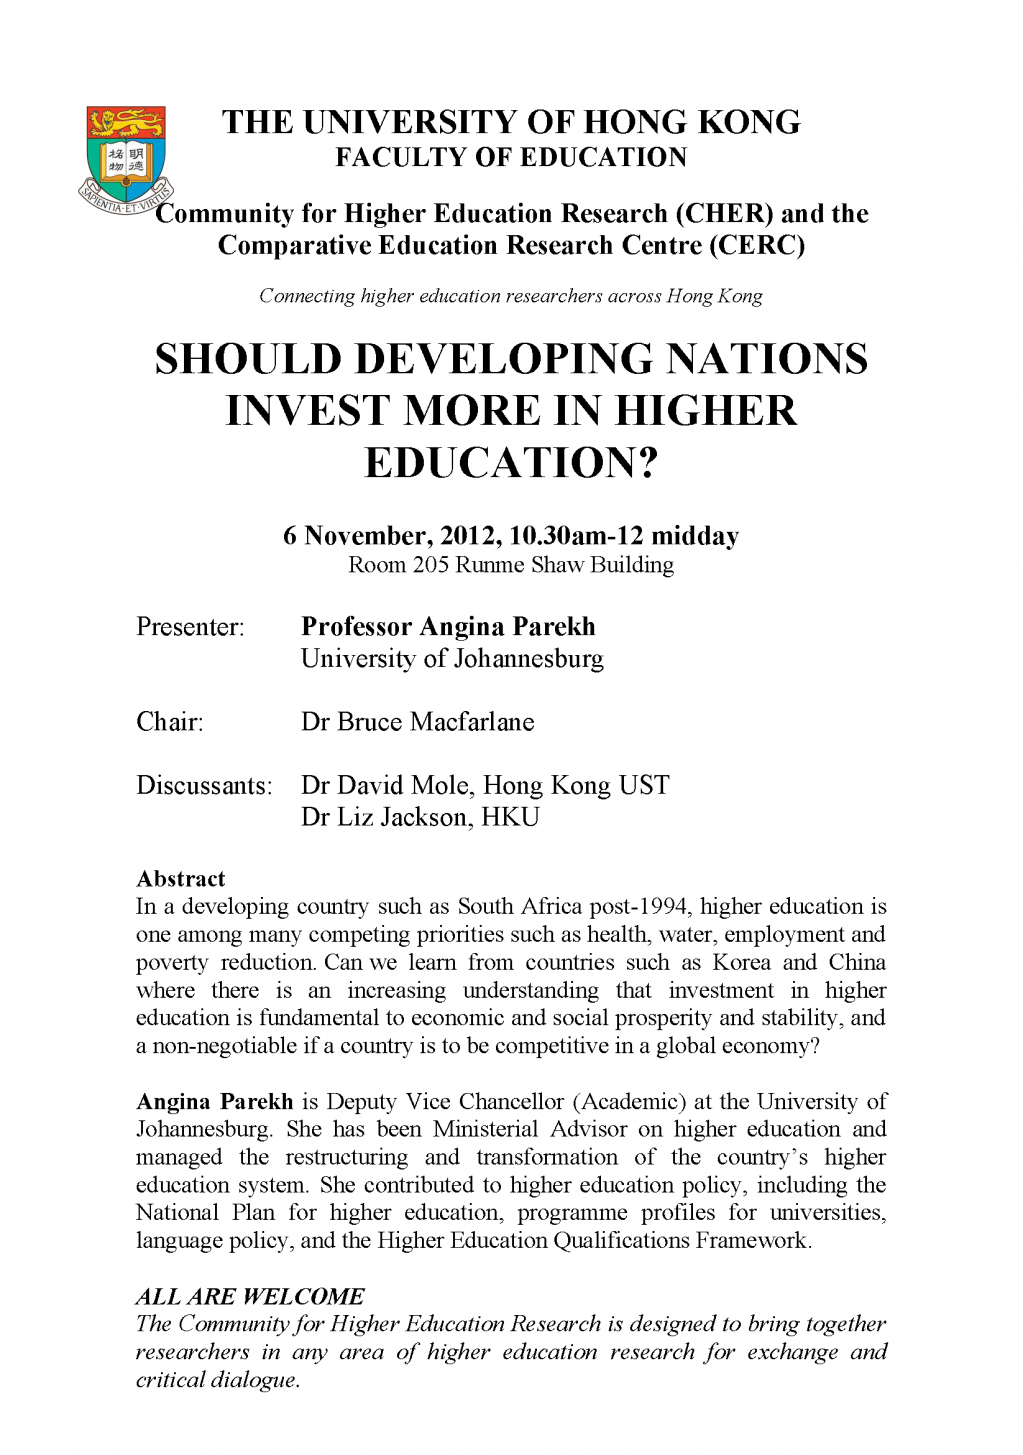 Seminar: SHOULD DEVELOPING NATIONS INVEST MORE IN HIGHER EDUCATION?